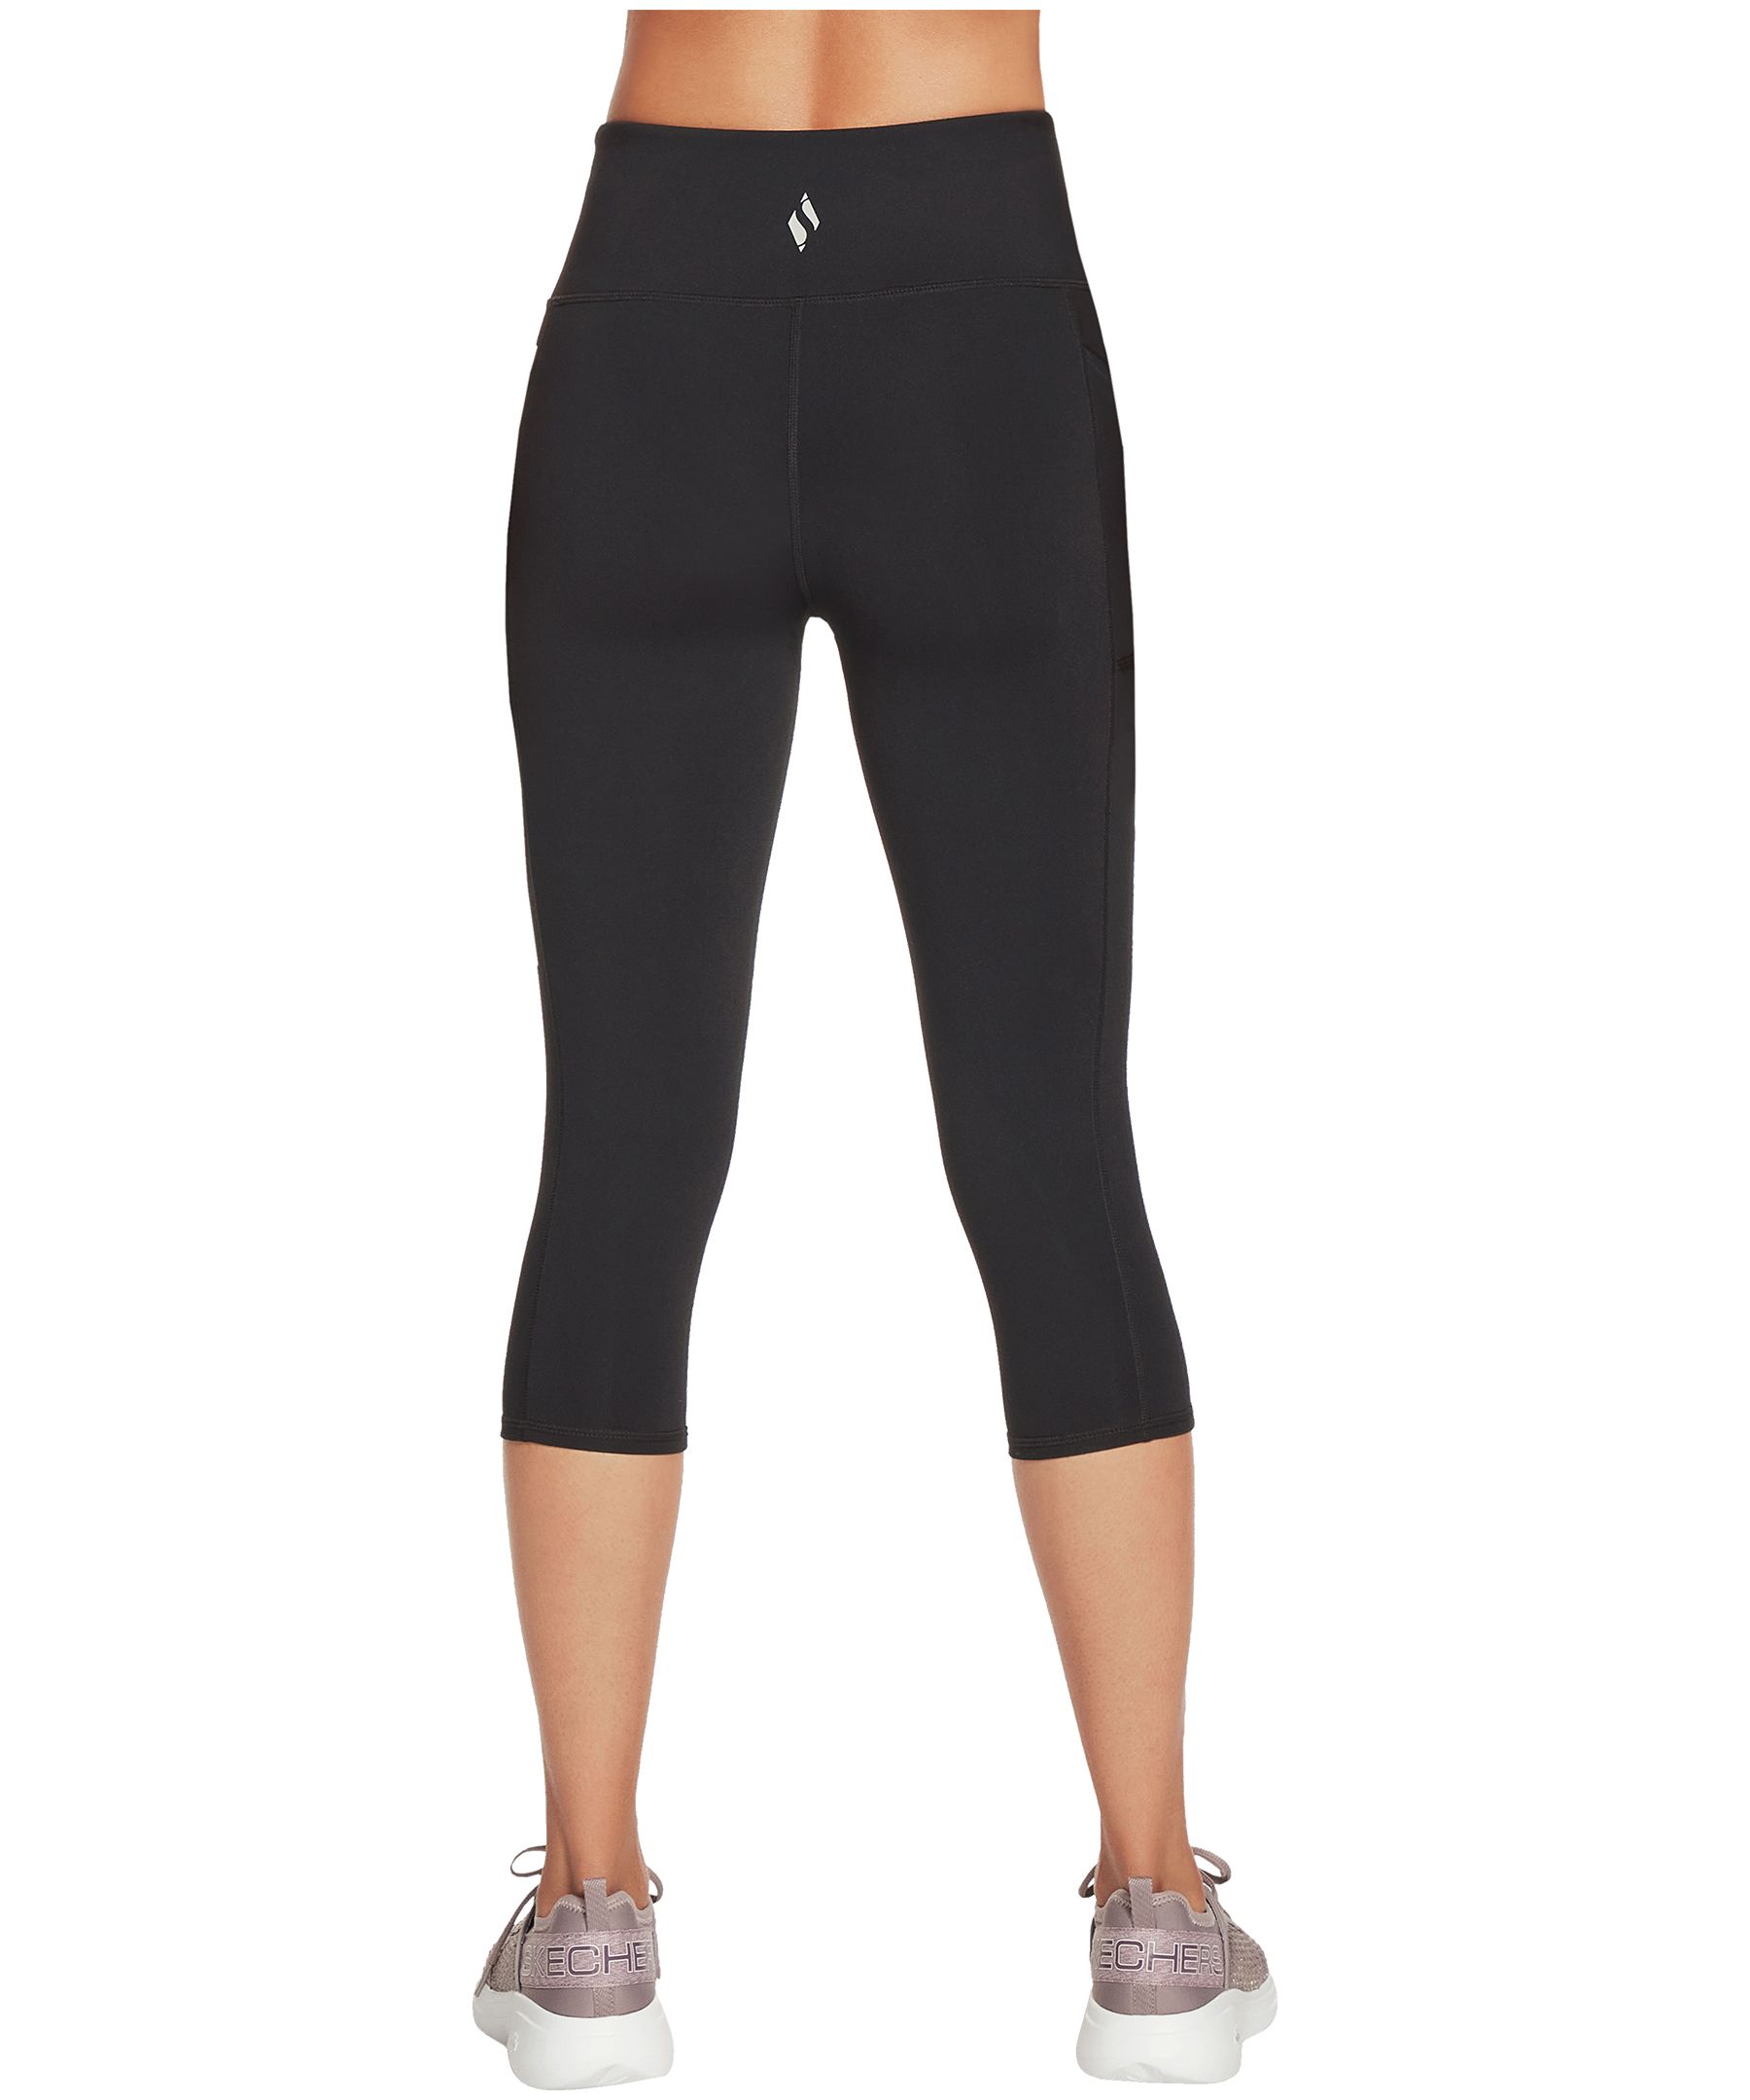 Avia Women's Plus Size High Waisted Moisture Wicking Leggings with Phone  Pocket